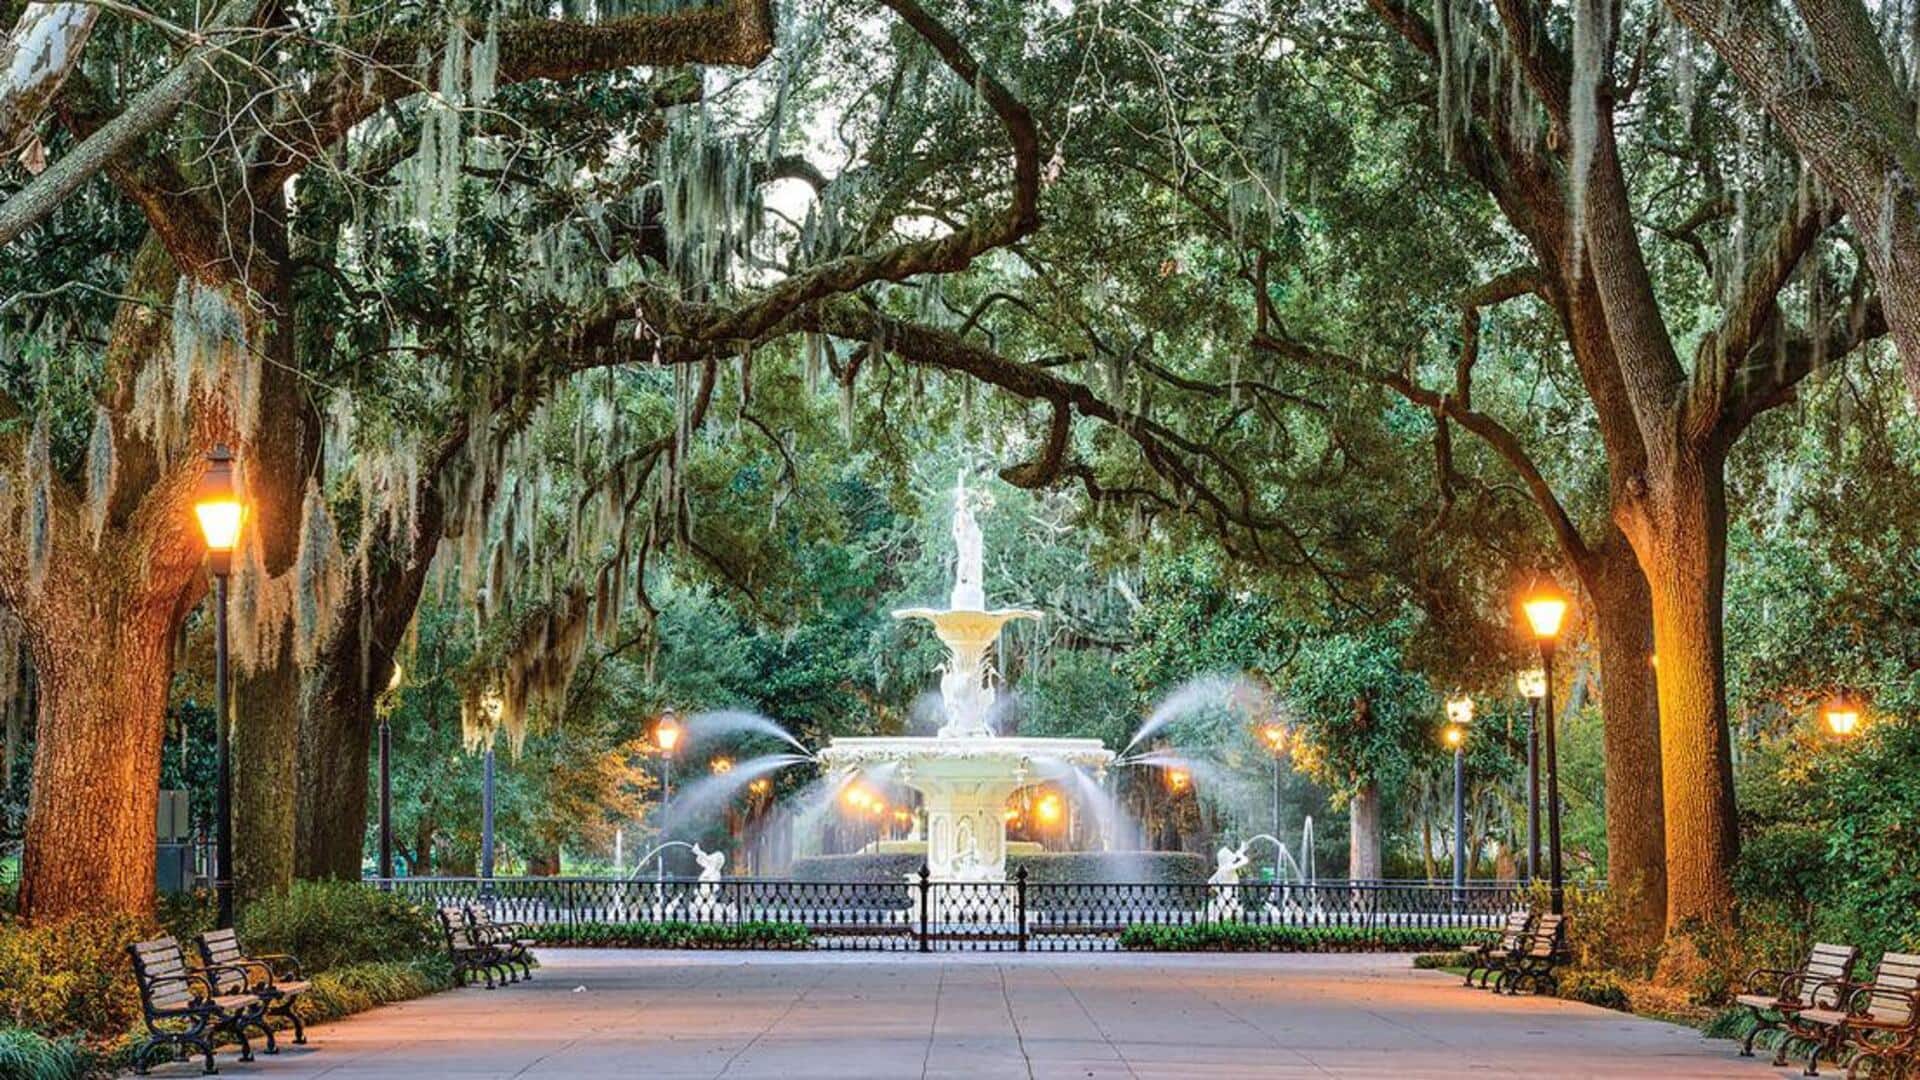 Discover Savannah's timeless beauty with this travel guide